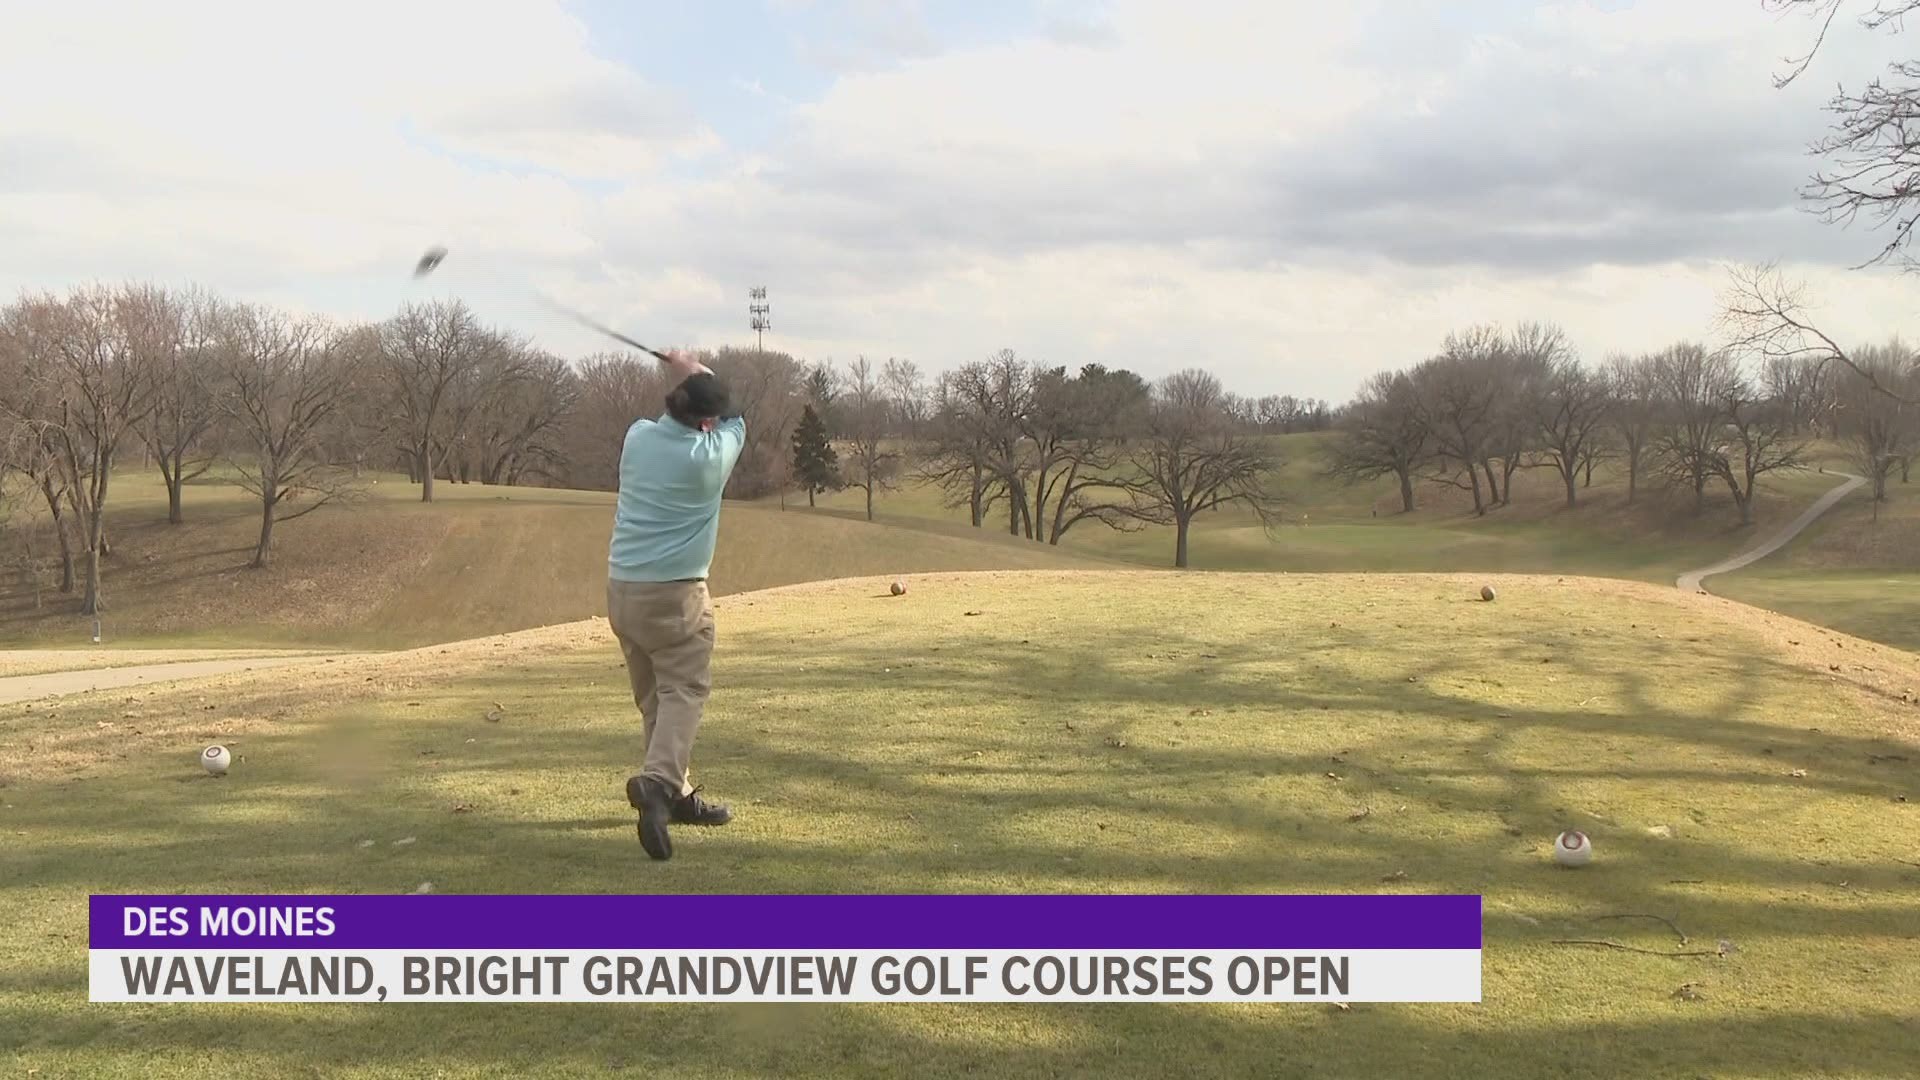 Parks and Recreation officials told Local 5 more than 104,000 rounds of golf were played at these courses in 2020.